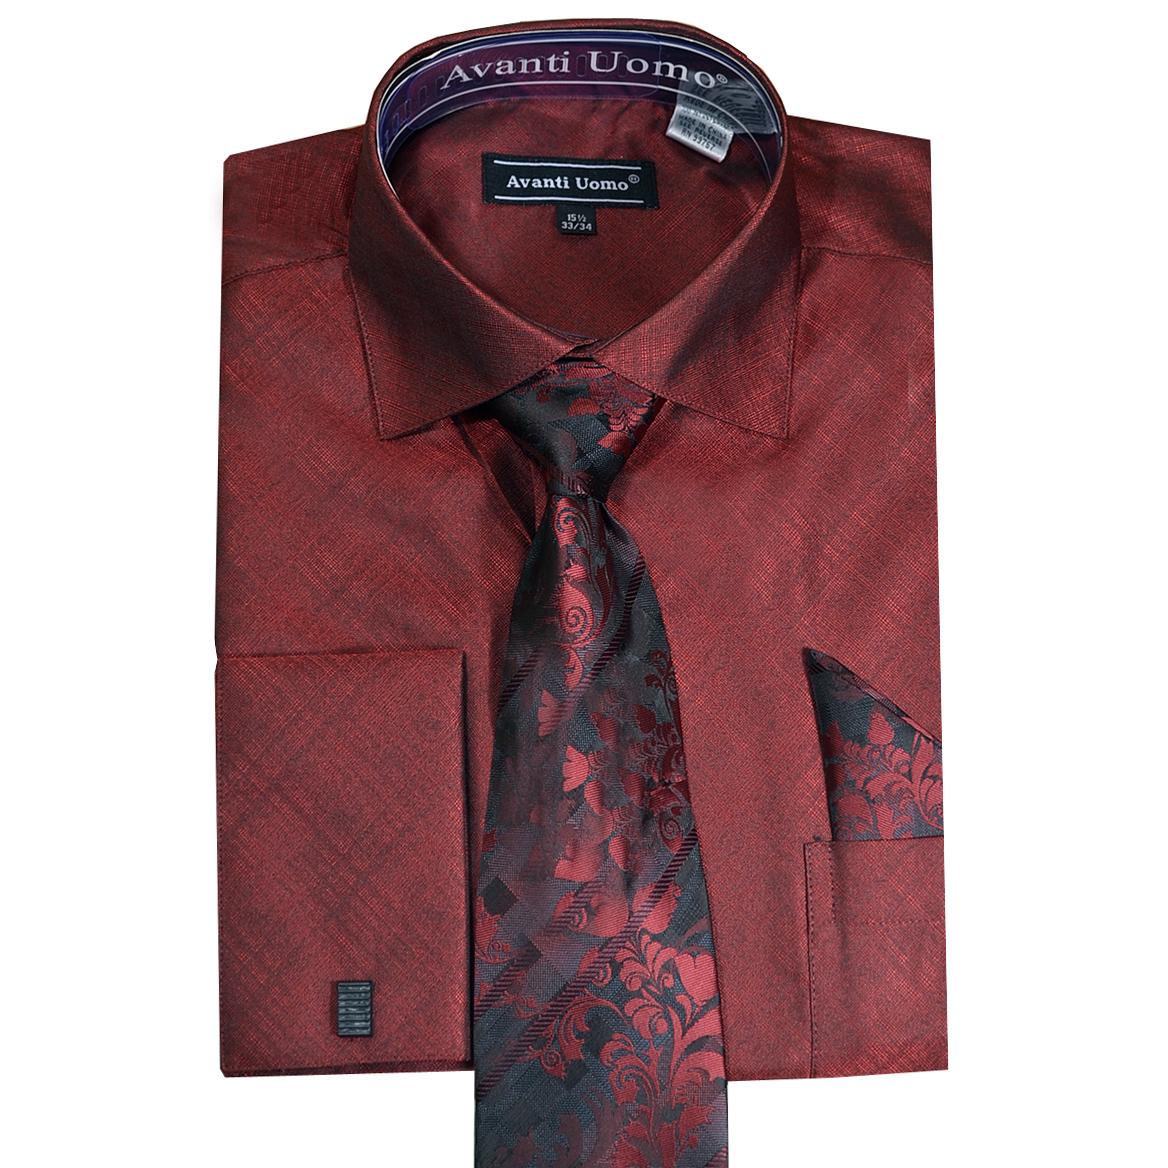 maroon dress shirt and tie